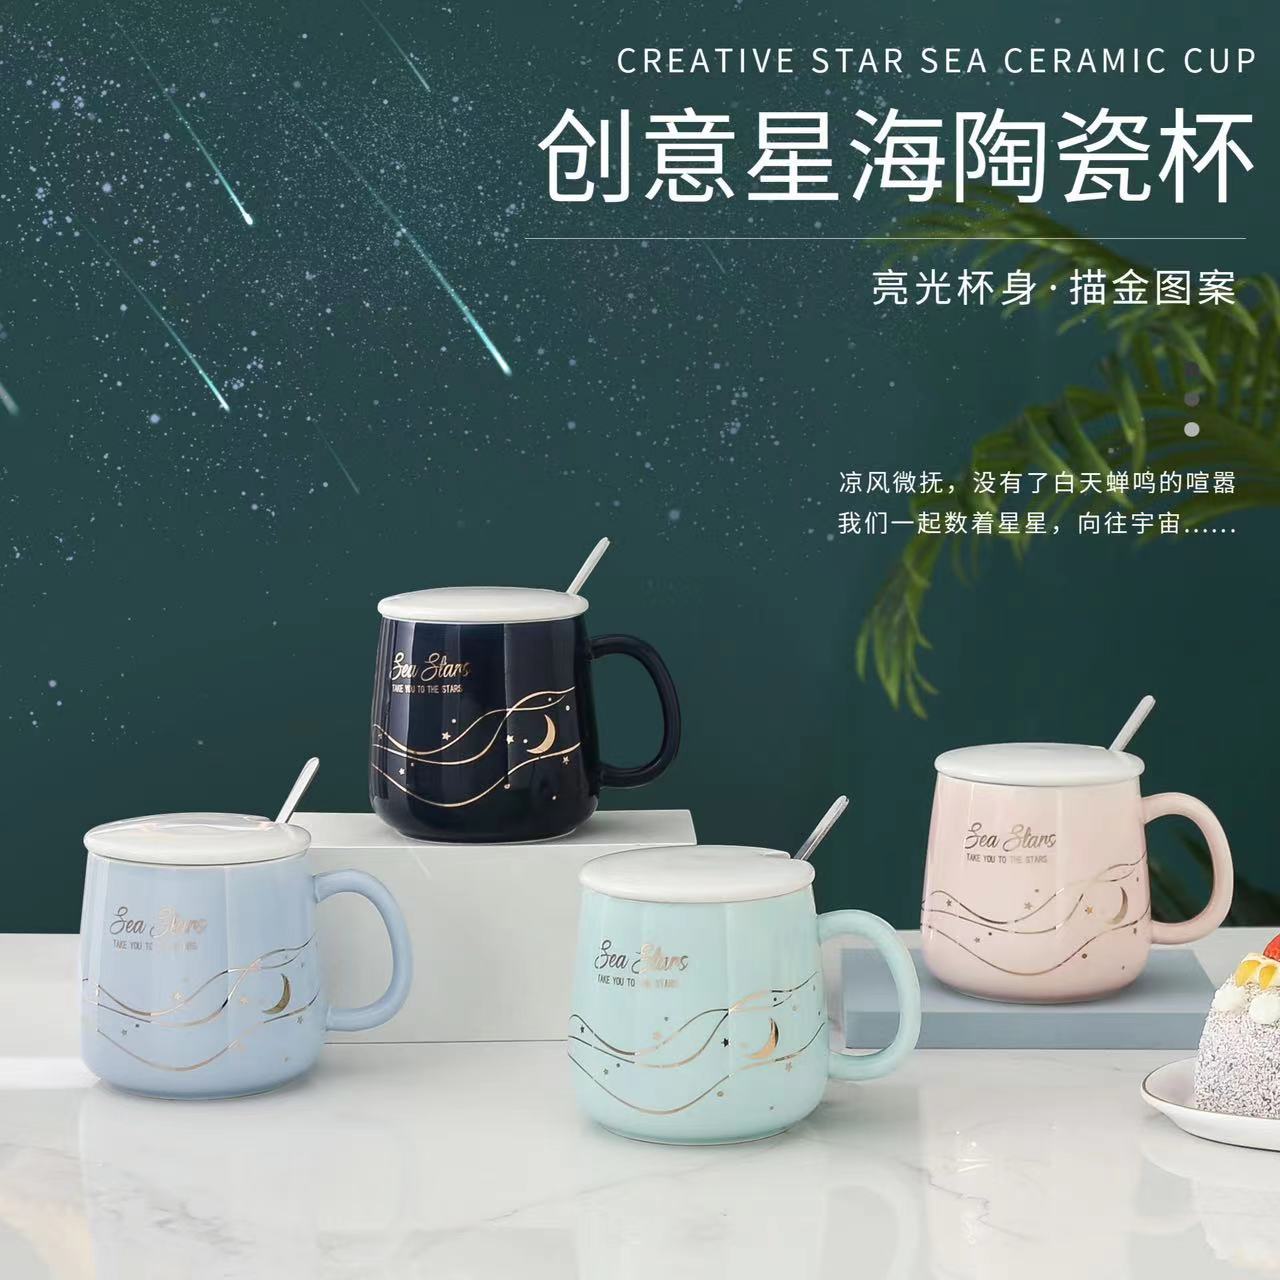 Light Luxury Mug Simple Ceramic Cup Household Coffee Cup Business Office Home Gift